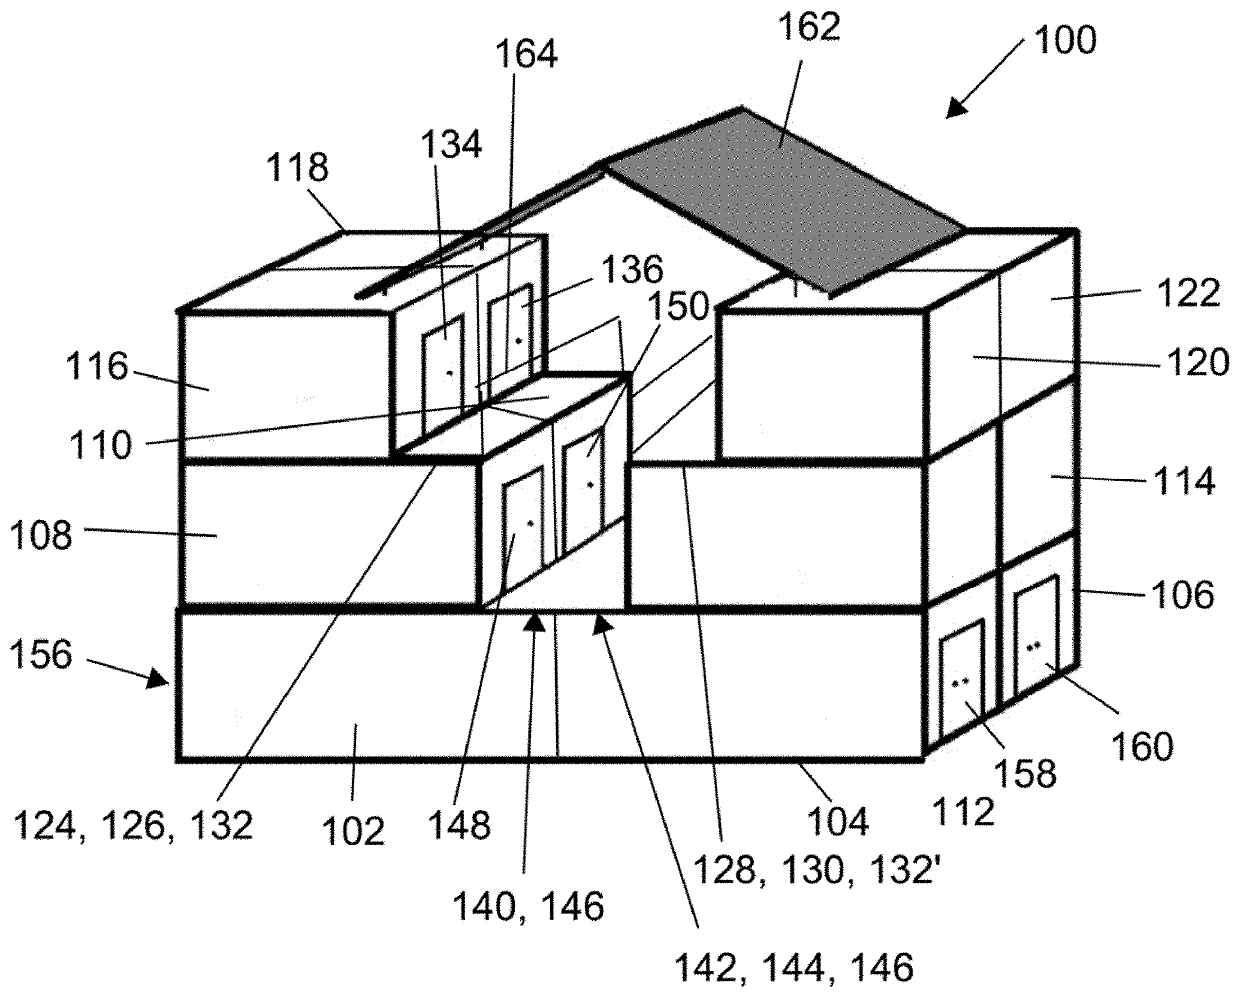 Method of designing, configuring and accessing a modular self-storage facility